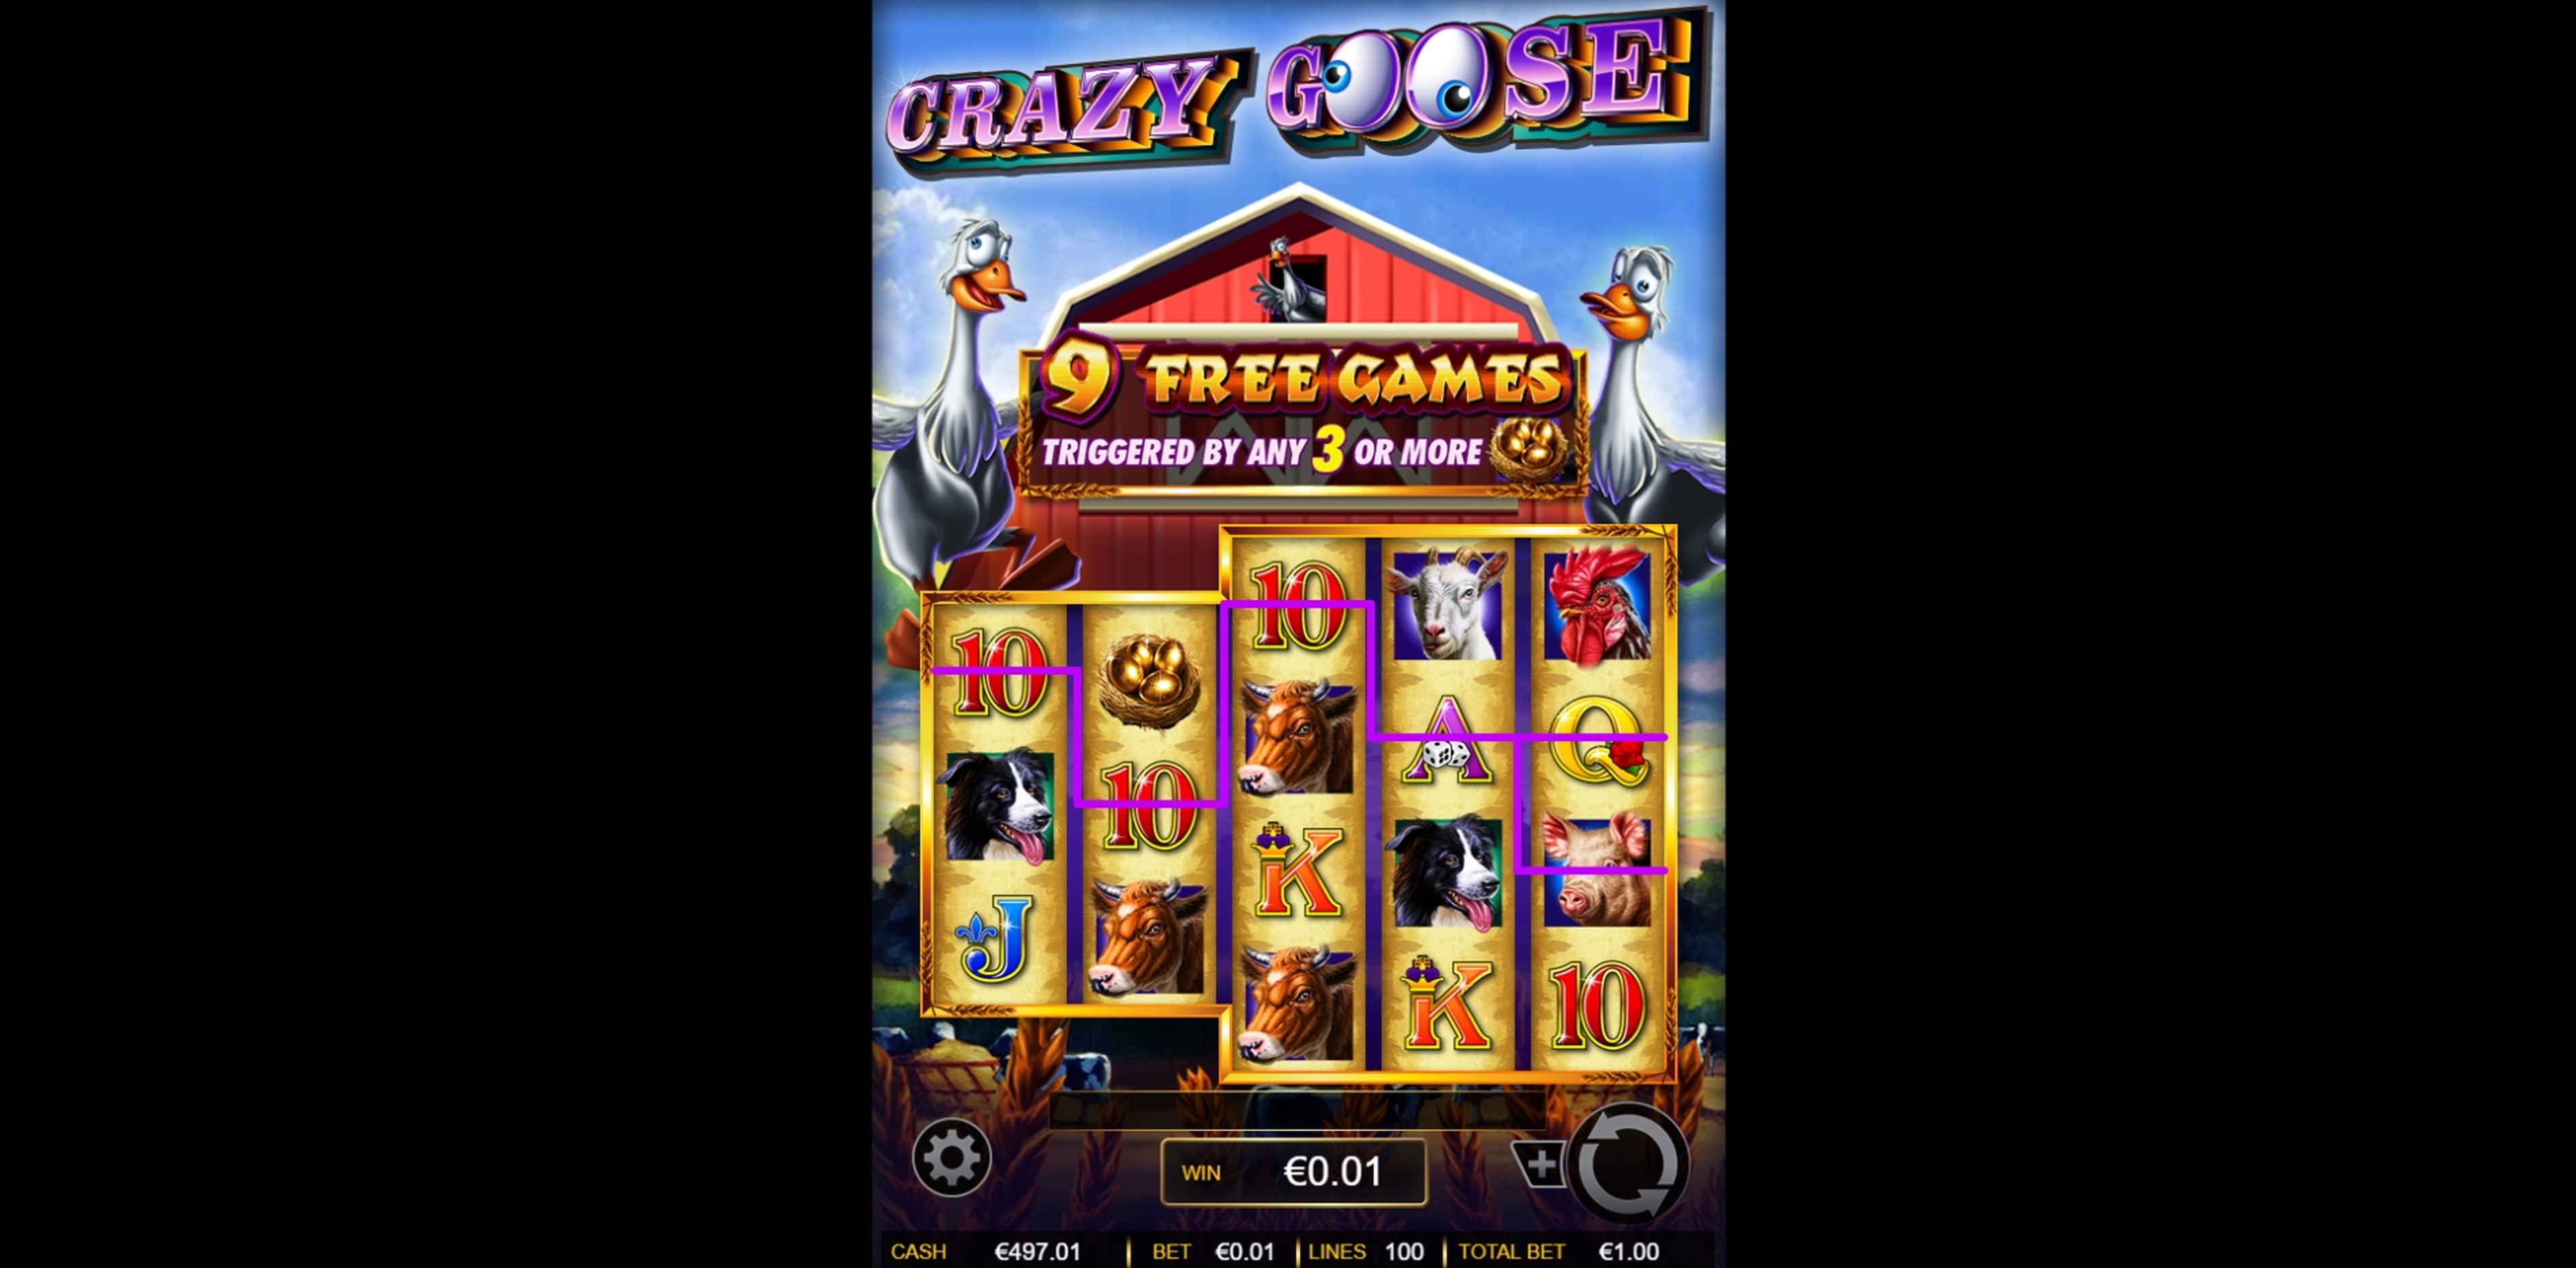 Win Money in Crazy Goose Free Slot Game by Ainsworth Gaming Technology